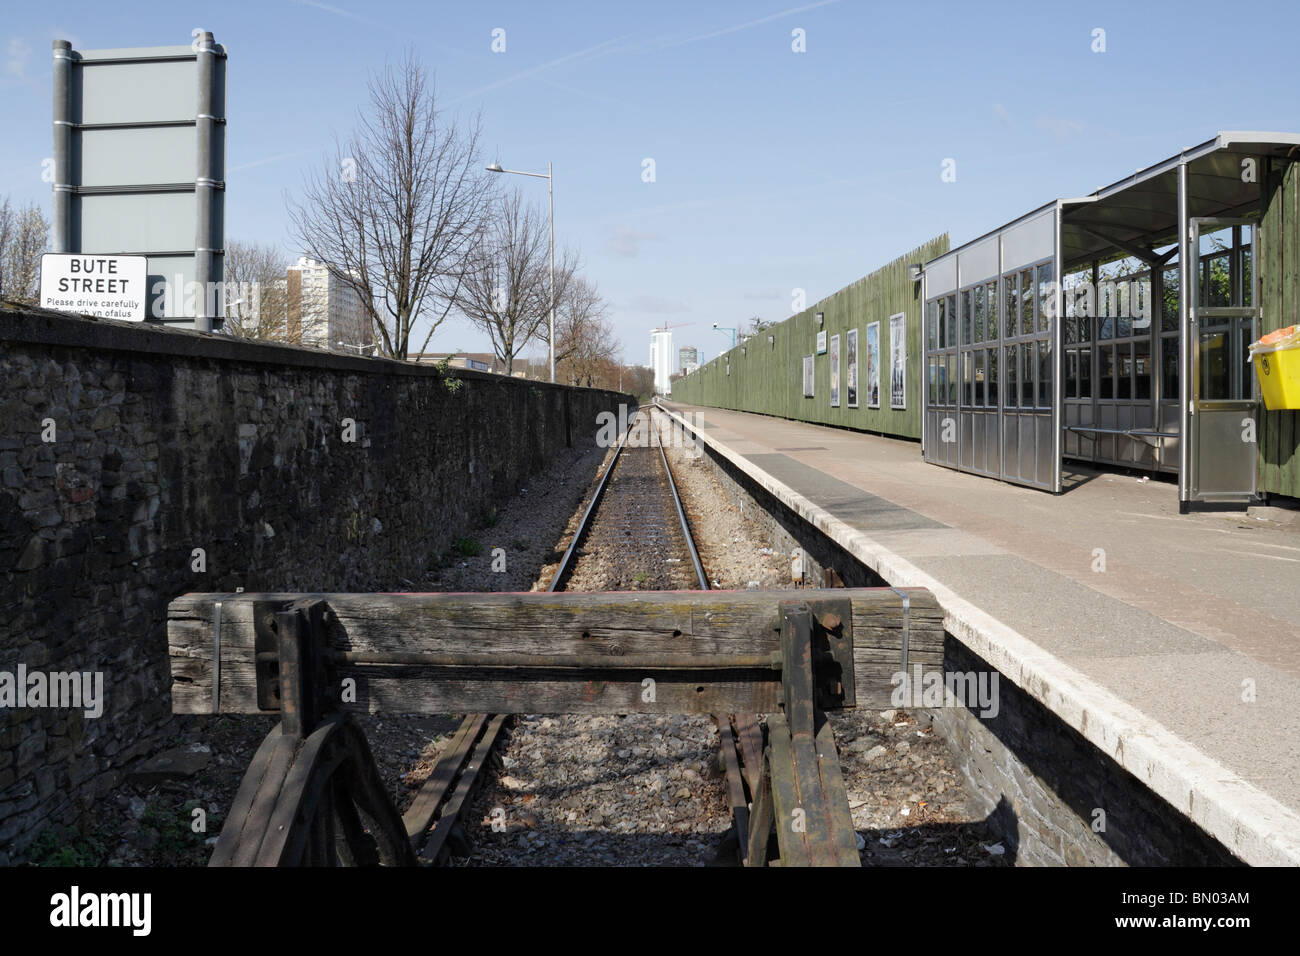 Butetown / Cardiff Bay Railway Station, Wales, Branch line, end of the line Stock Photo